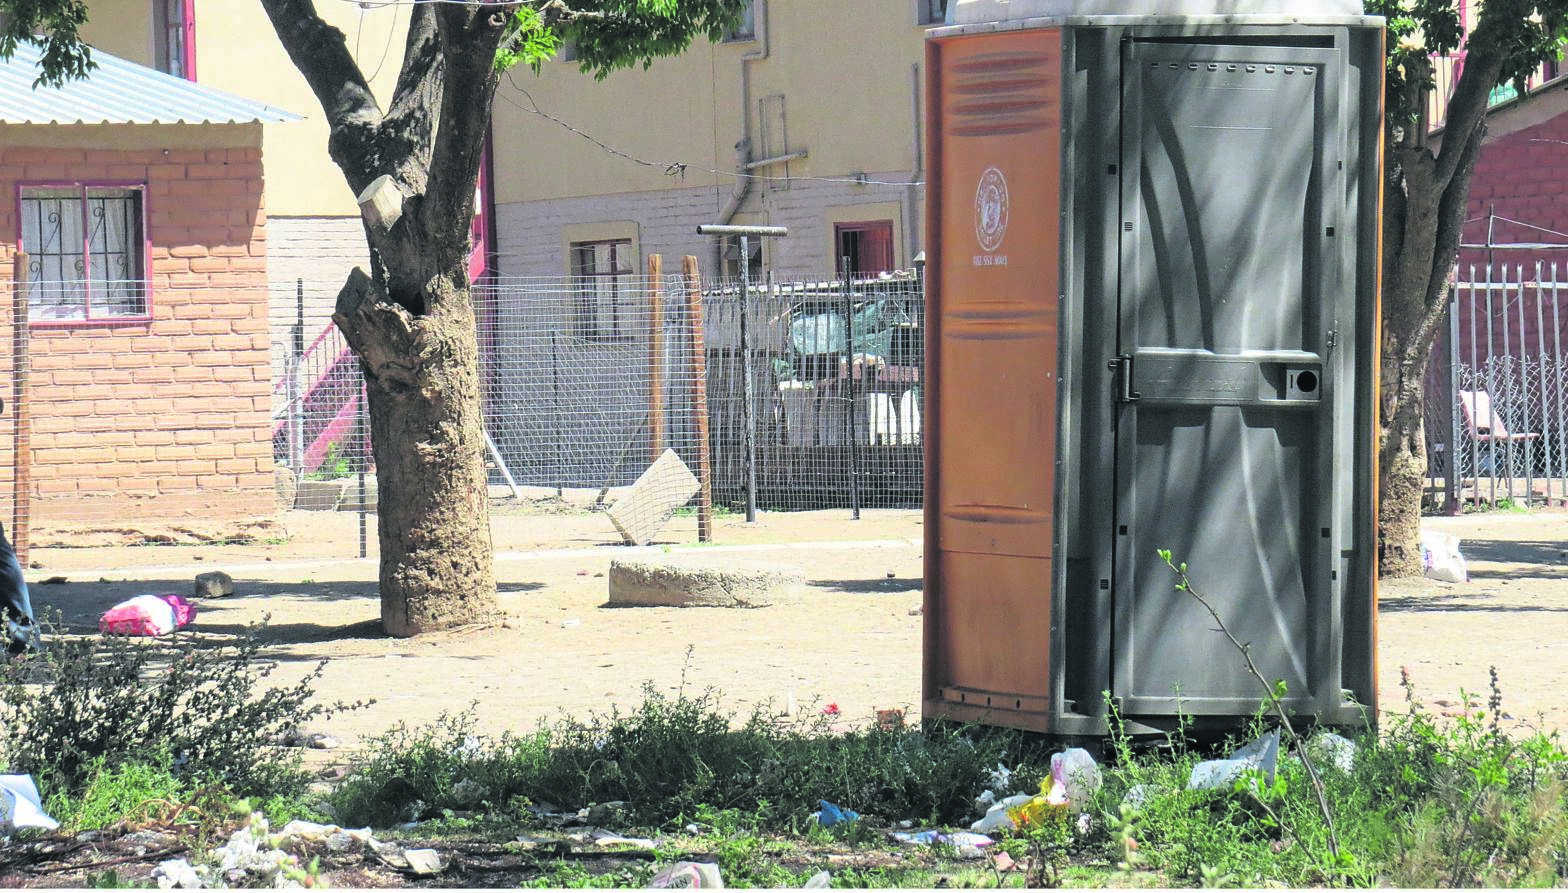 The City of Johannesburg uses 'VIP toilets' and chemical toilets to provide sanitation to poor communities.